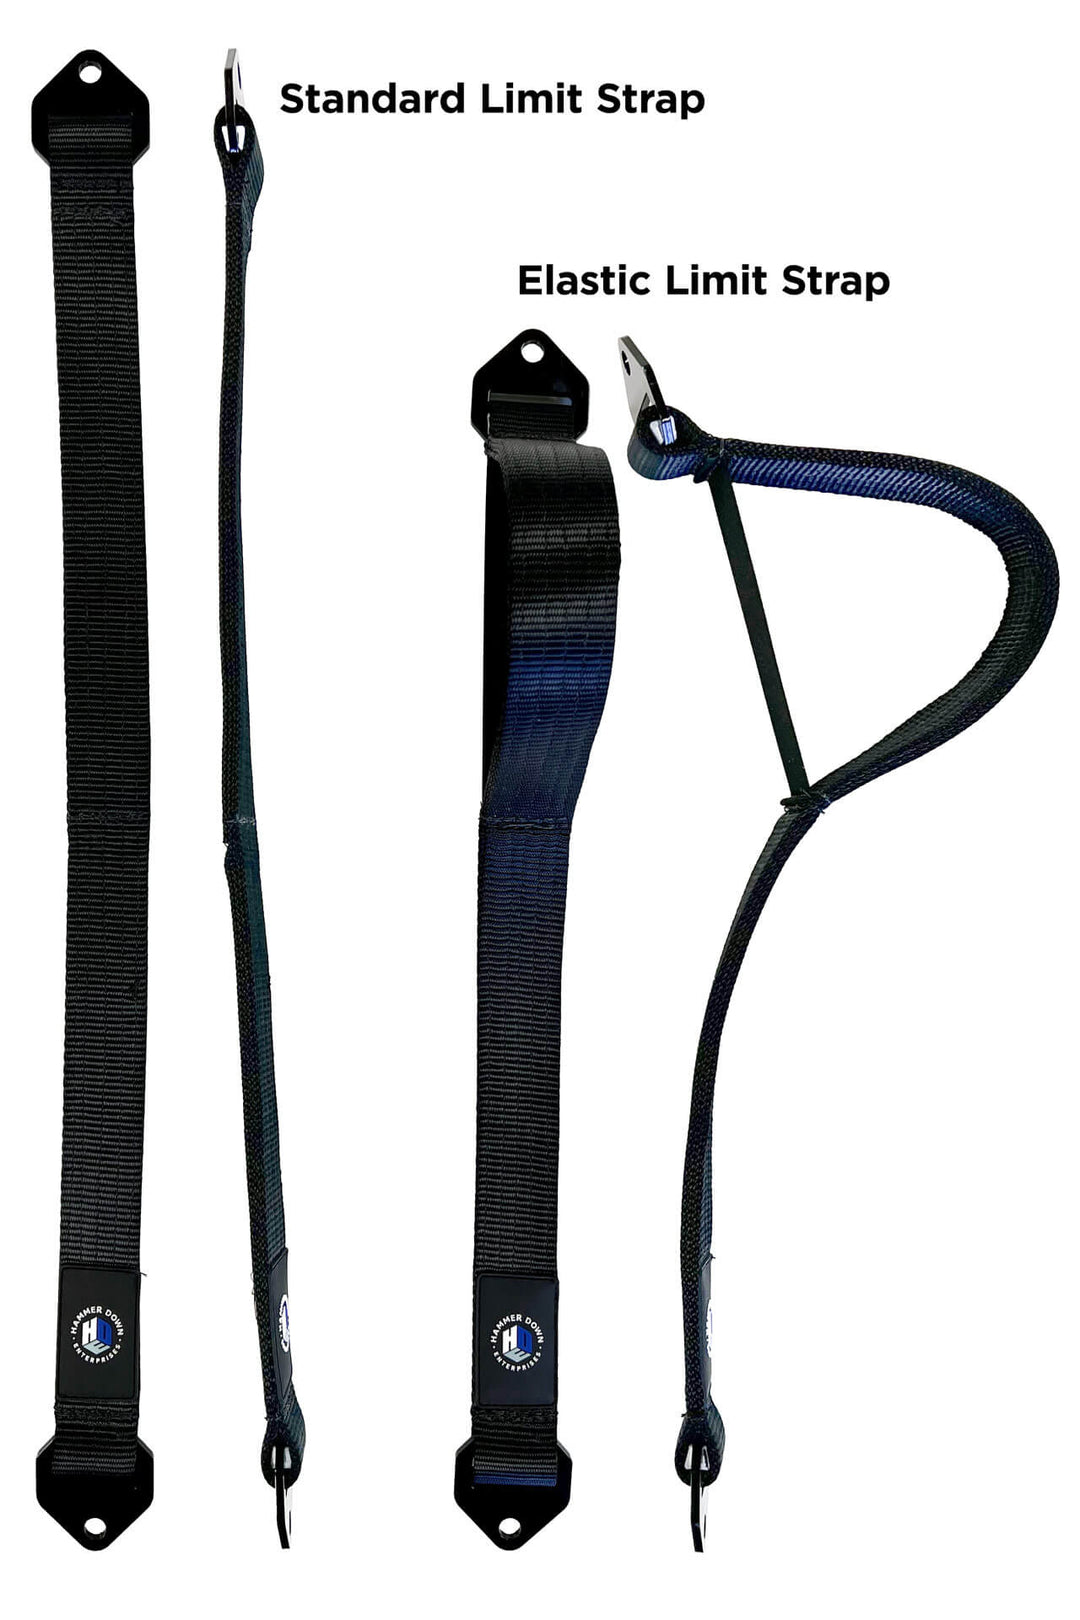 HDE 4-Layer Extreme Duty Limit Straps